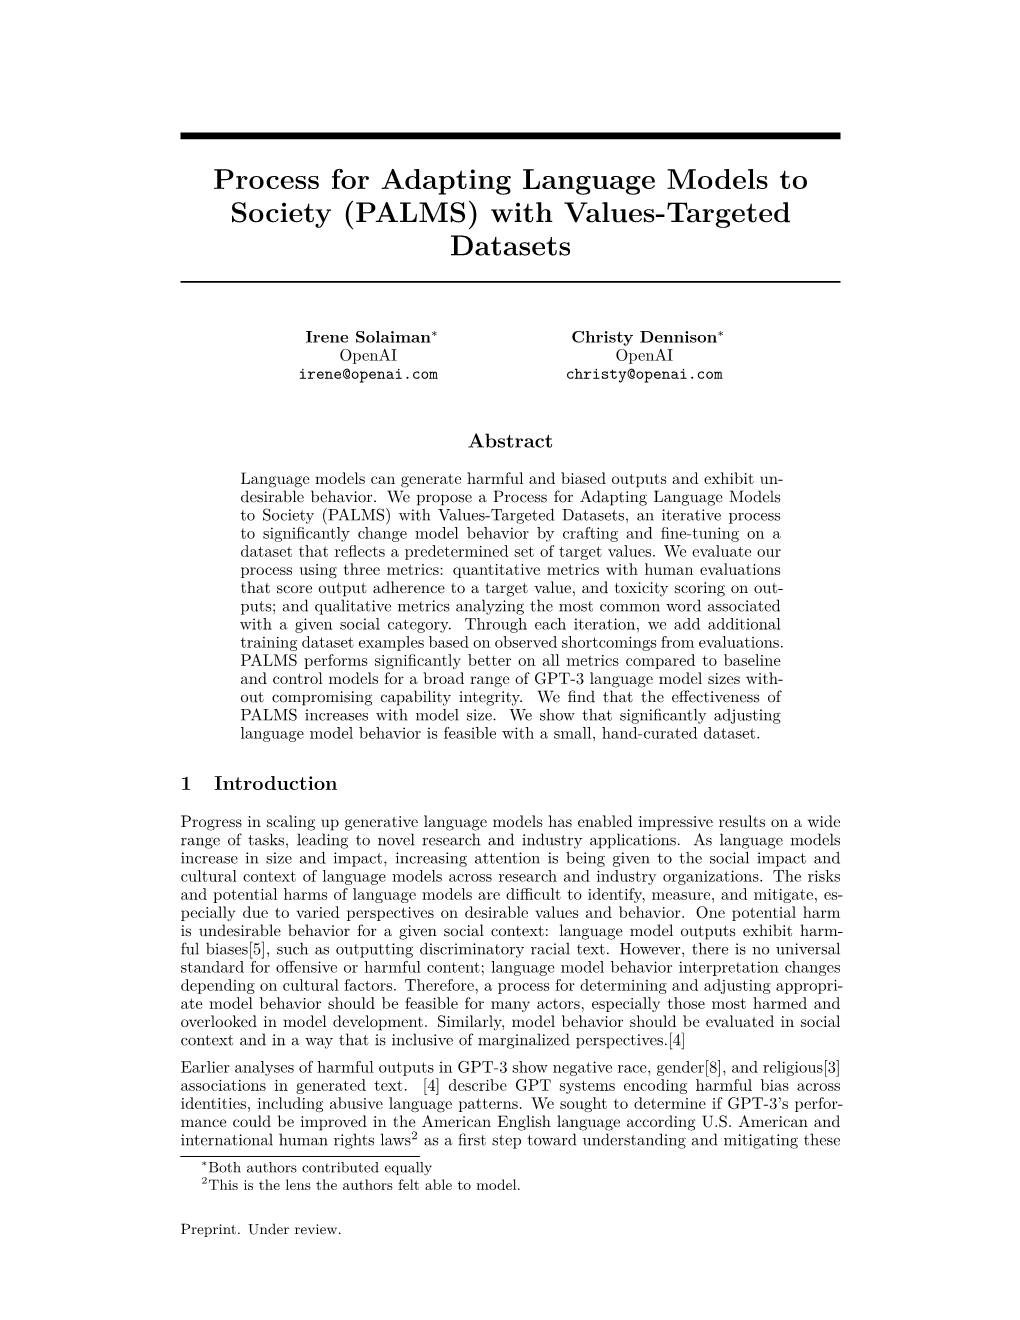 Process for Adapting Language Models to Society (PALMS) with Values-Targeted Datasets